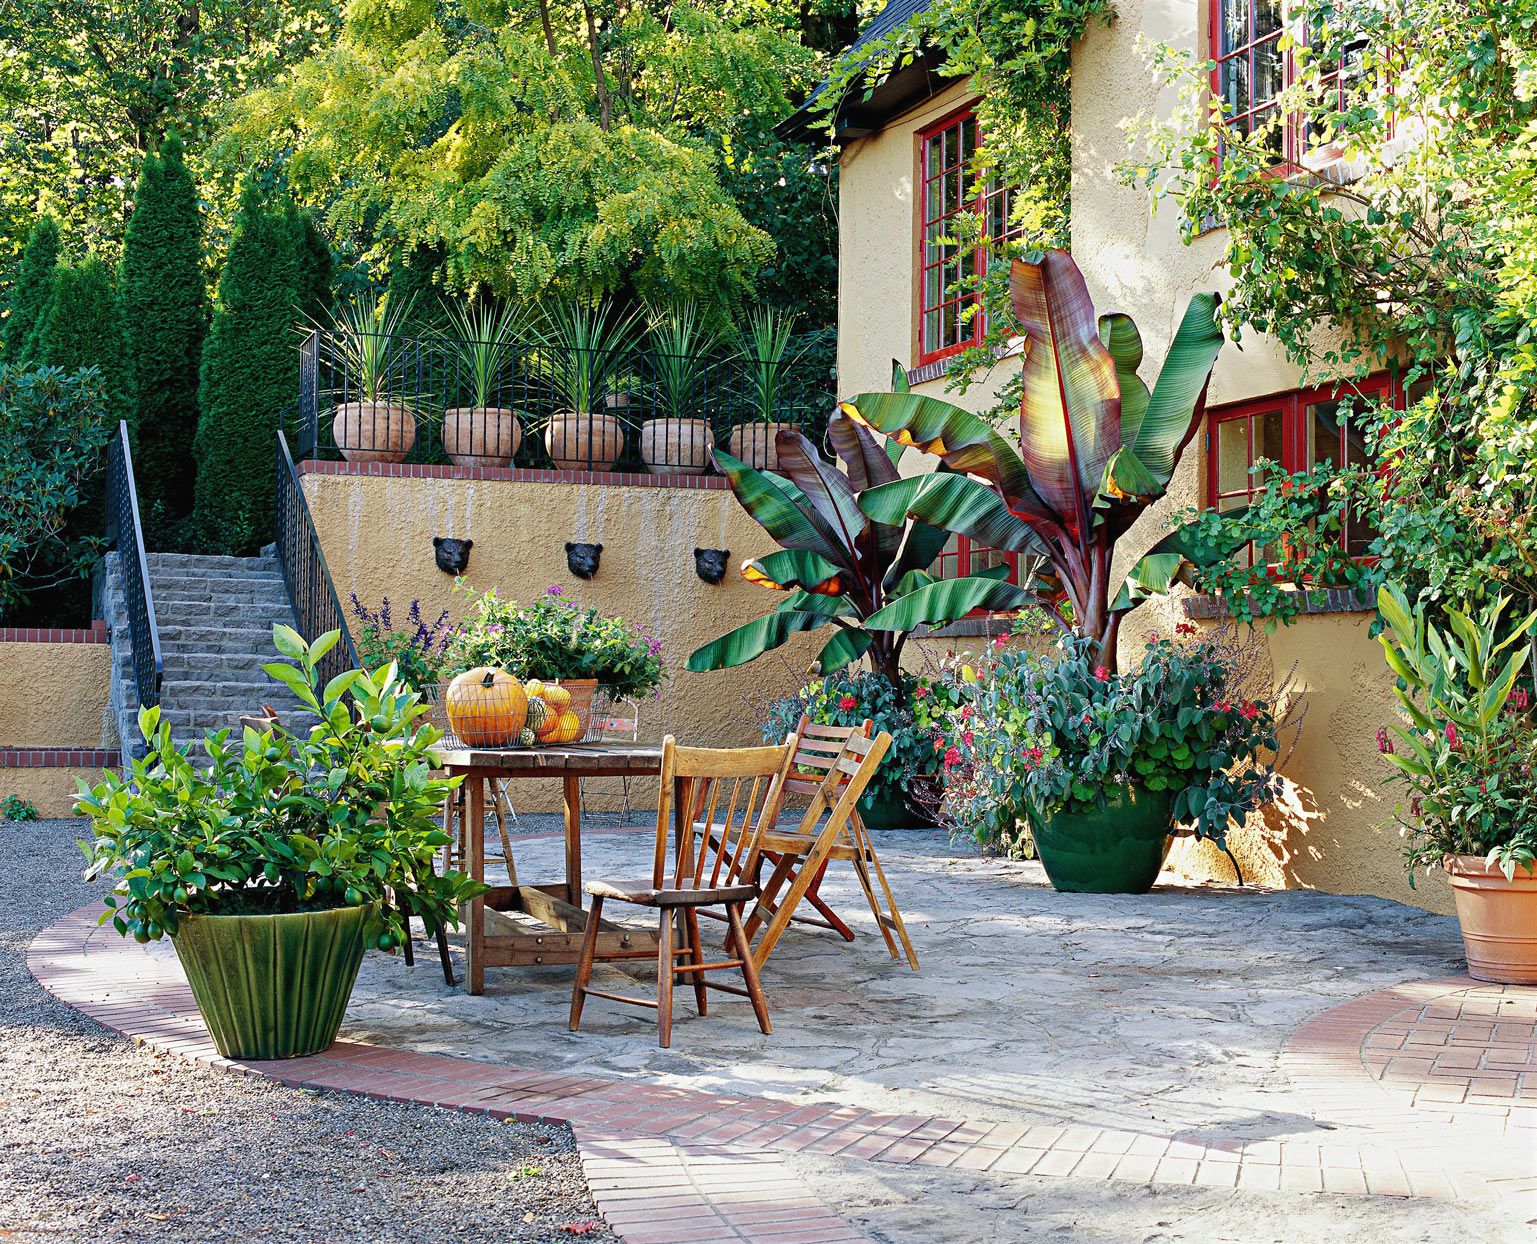 Things to Keep in Mind while Remodeling Your Patio